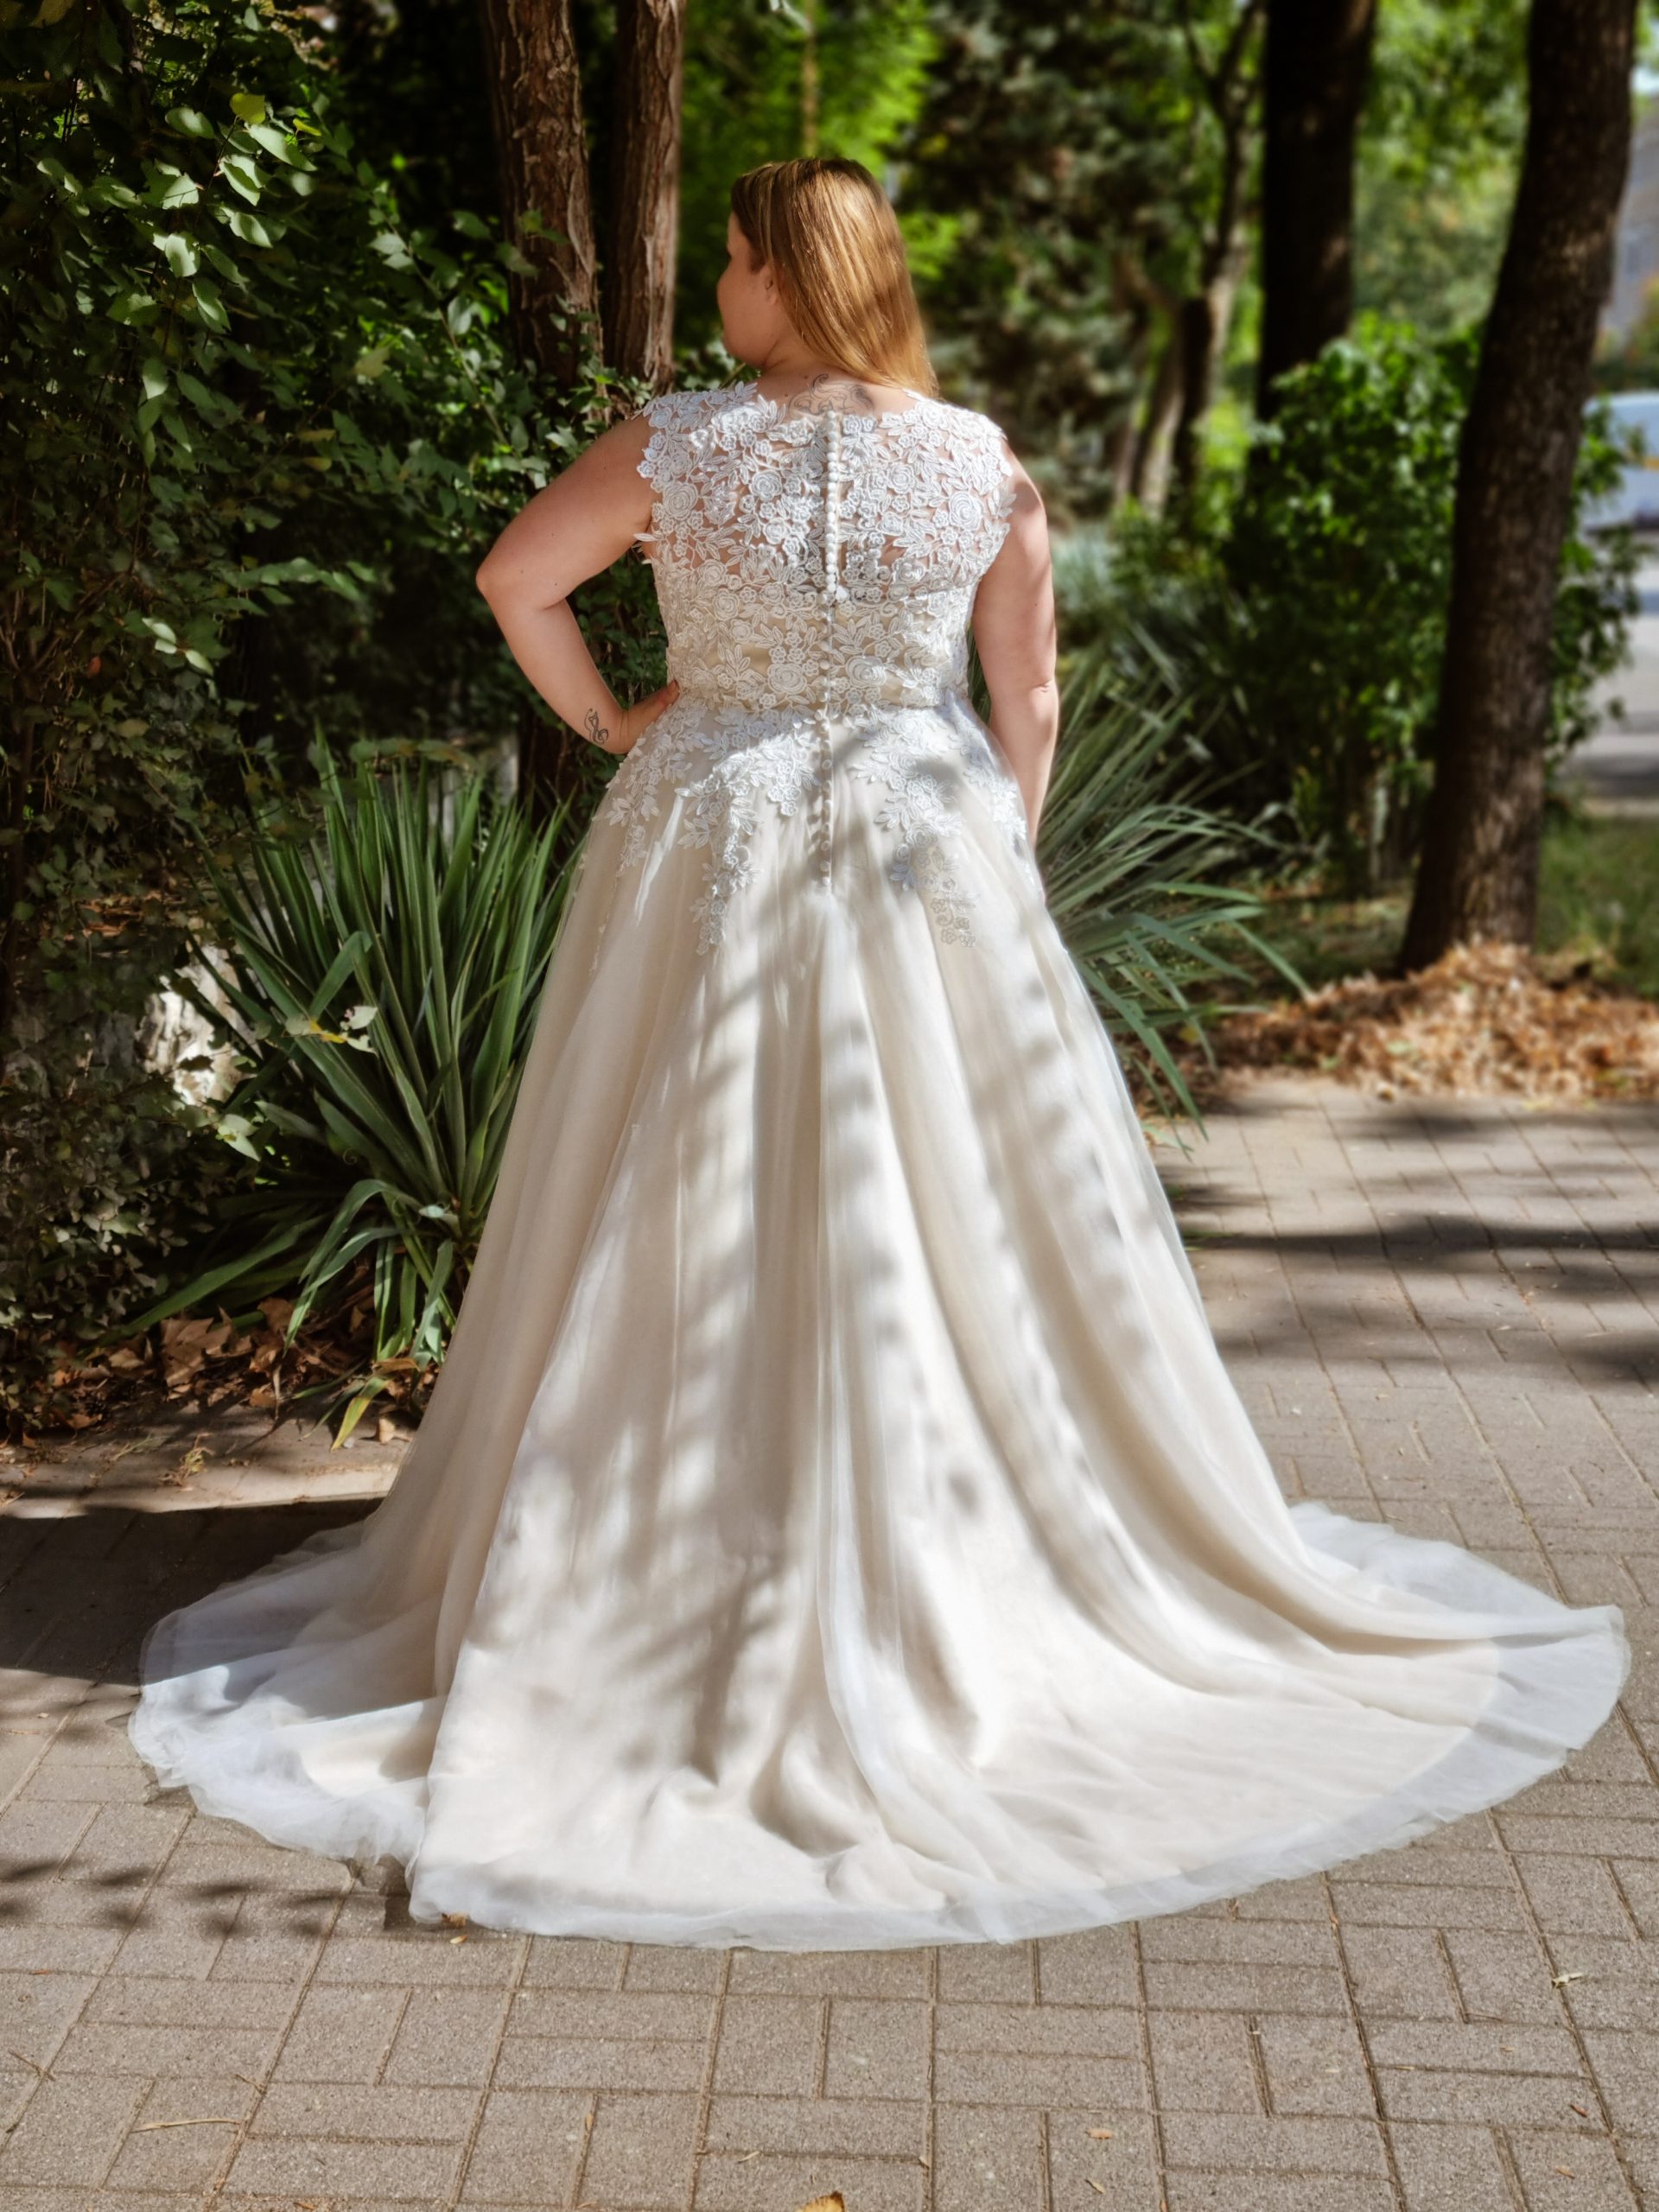 5 best wedding dress for rectangle body shape plus size, by sarah fashion